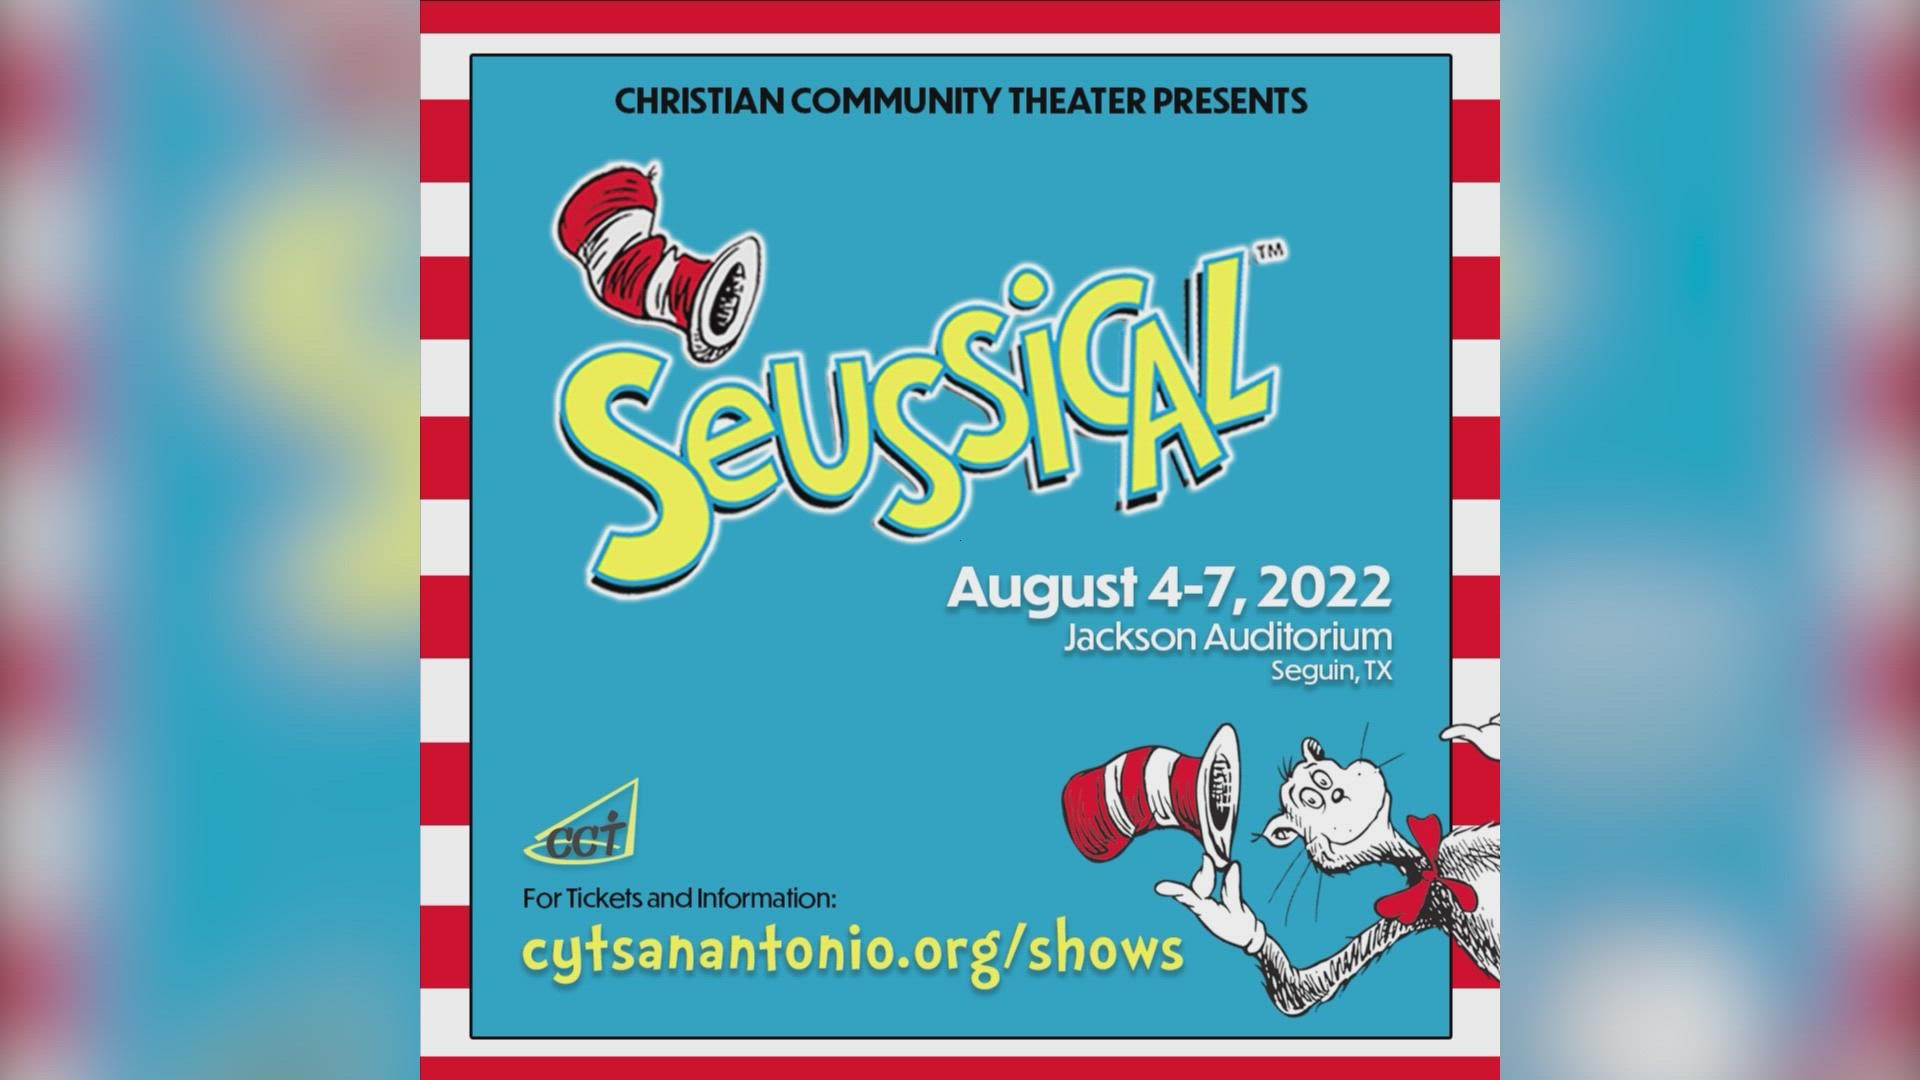 The musical will be in Seguin at the Jackson Auditorium Aug. 4 - Aug. 7.